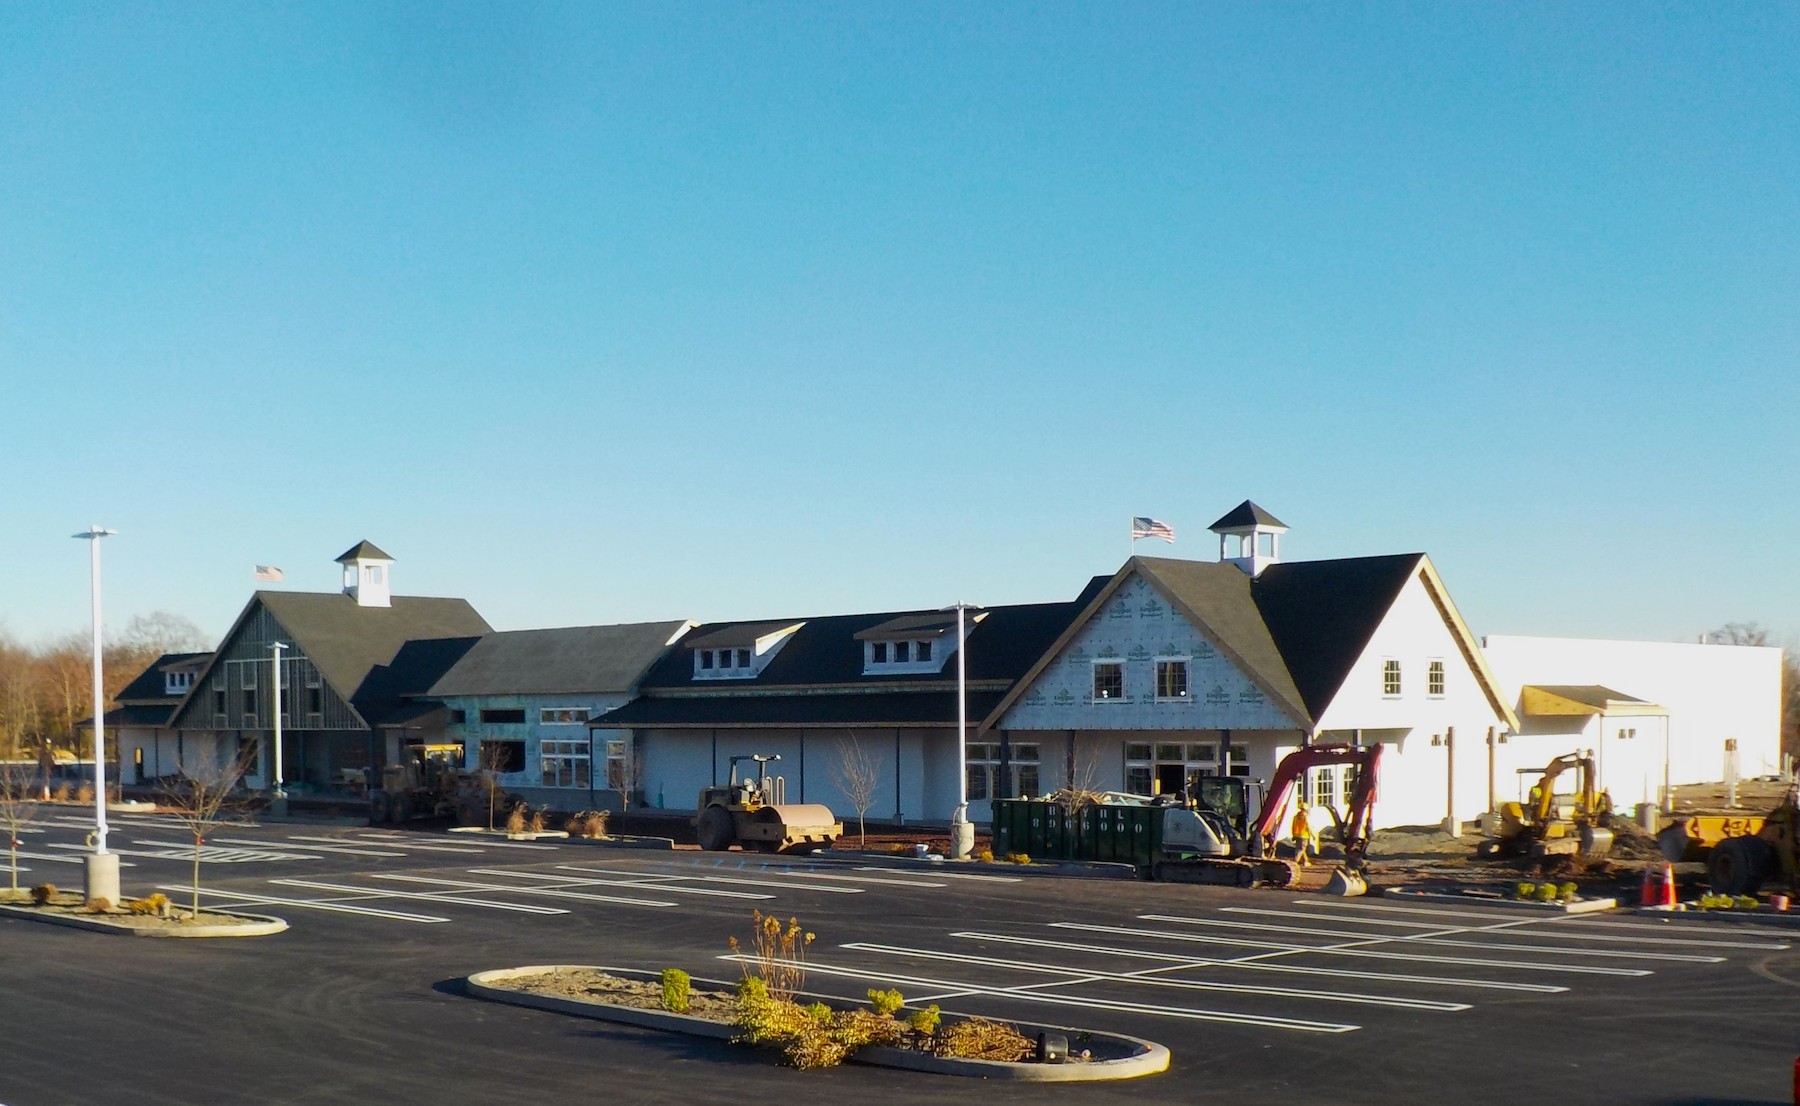 Adams Fairacre Farms' newest store in Middletown, N.Y.